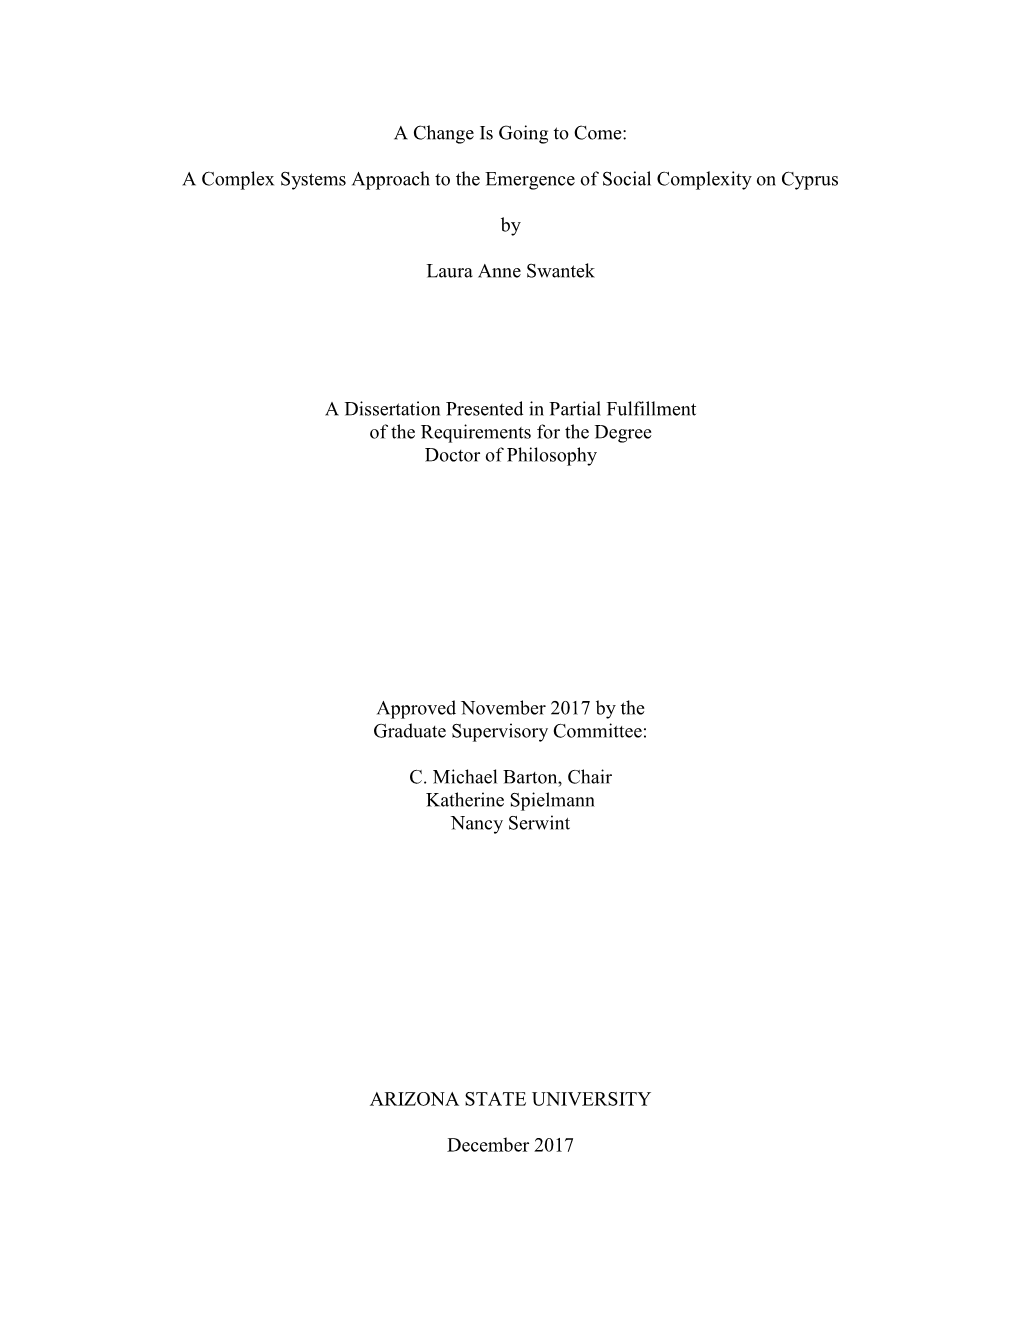 A Complex Systems Approach to the Emergence of Social Complexity on Cyprus